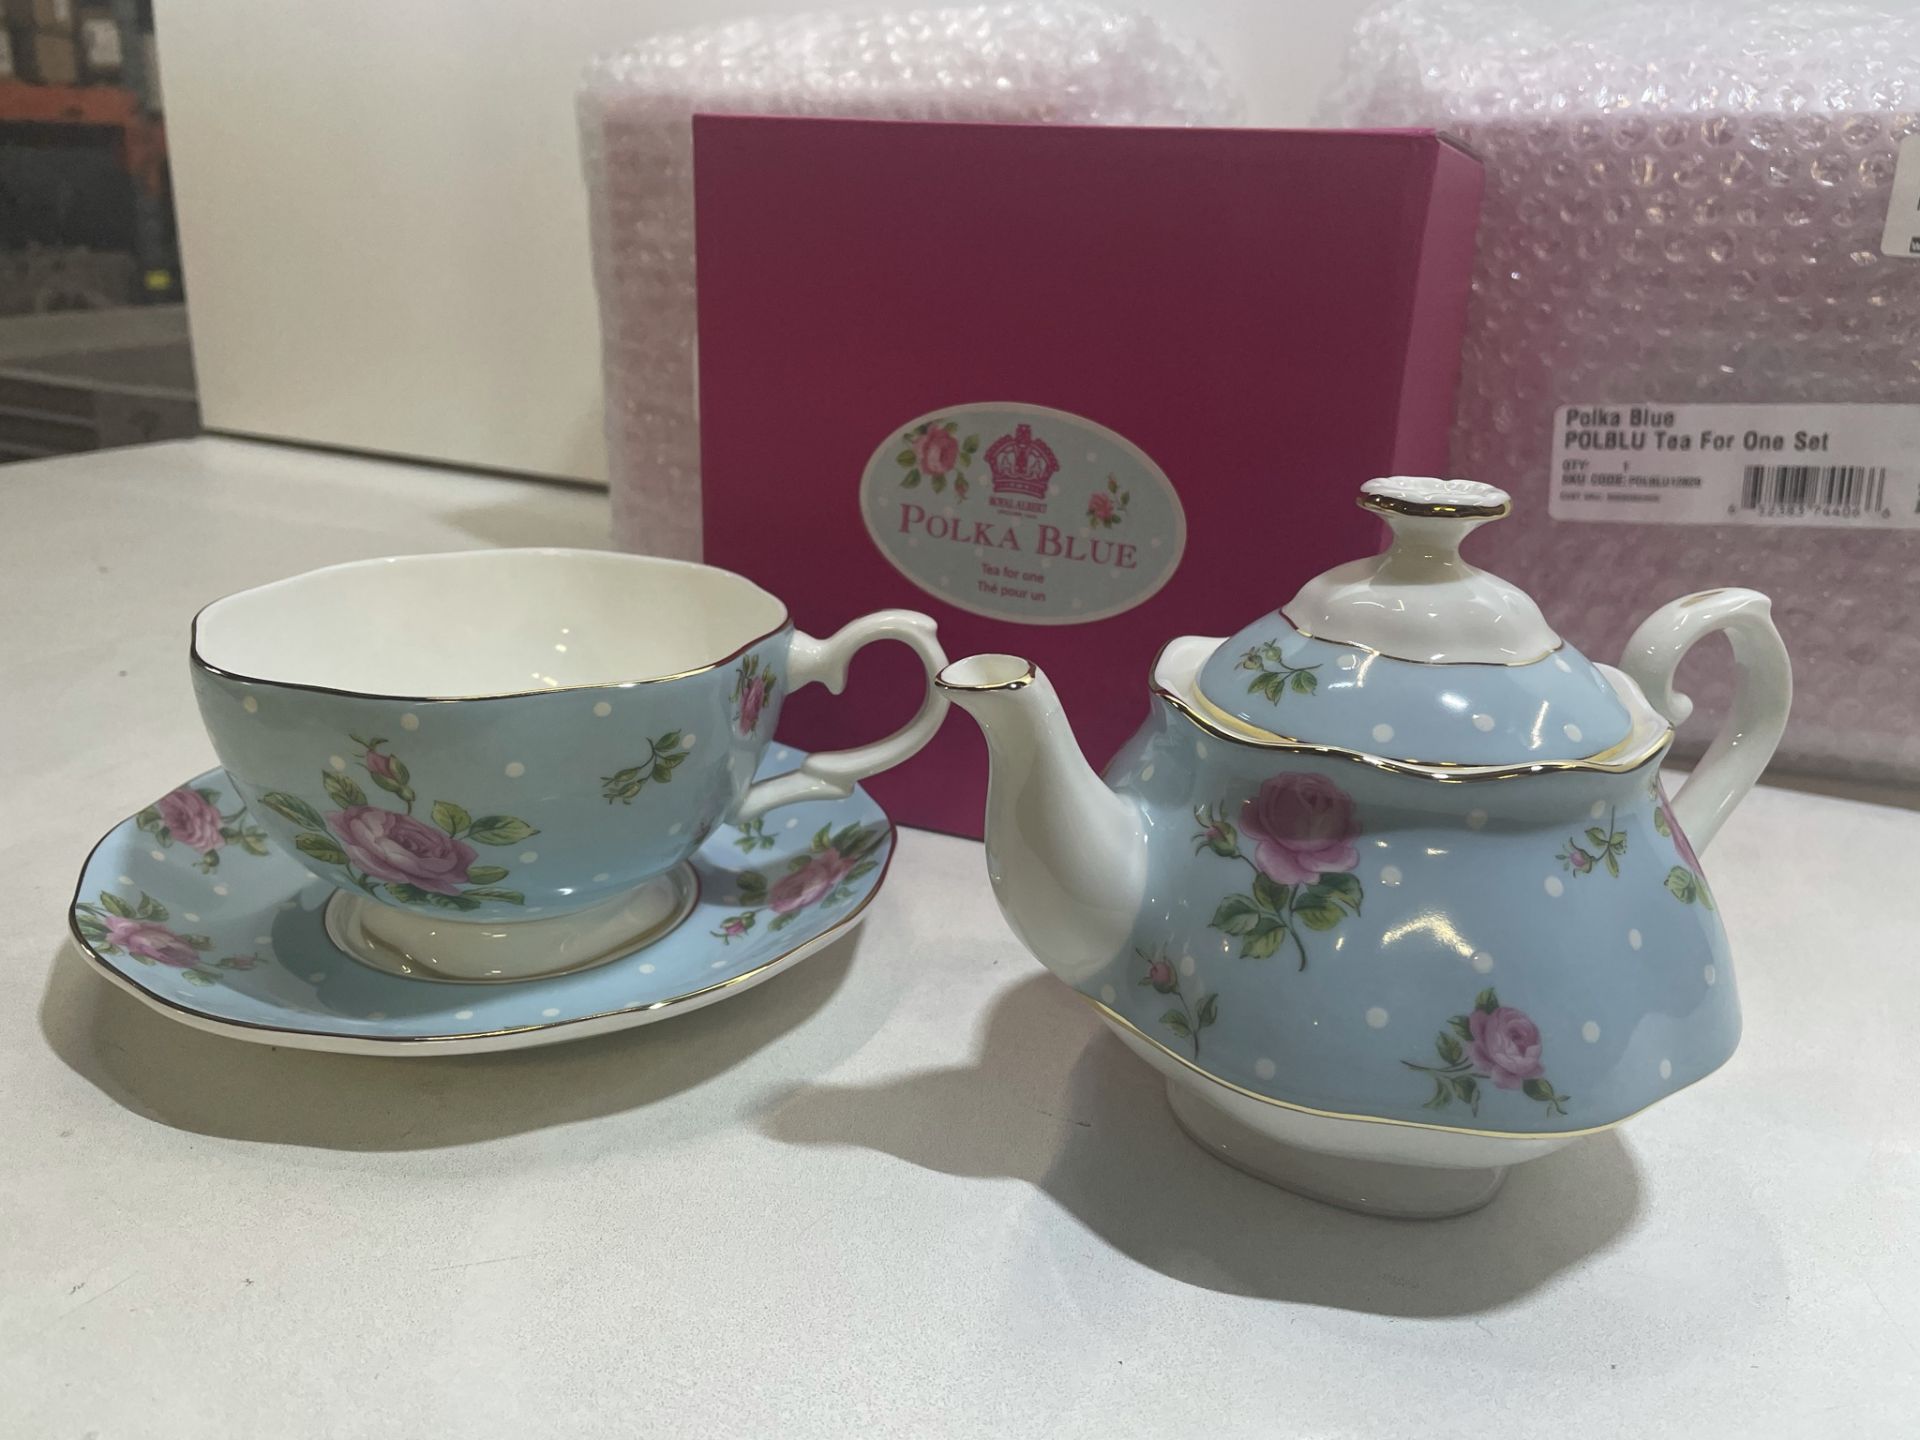 3 x Polka Blue Tea for One Sets in Blue